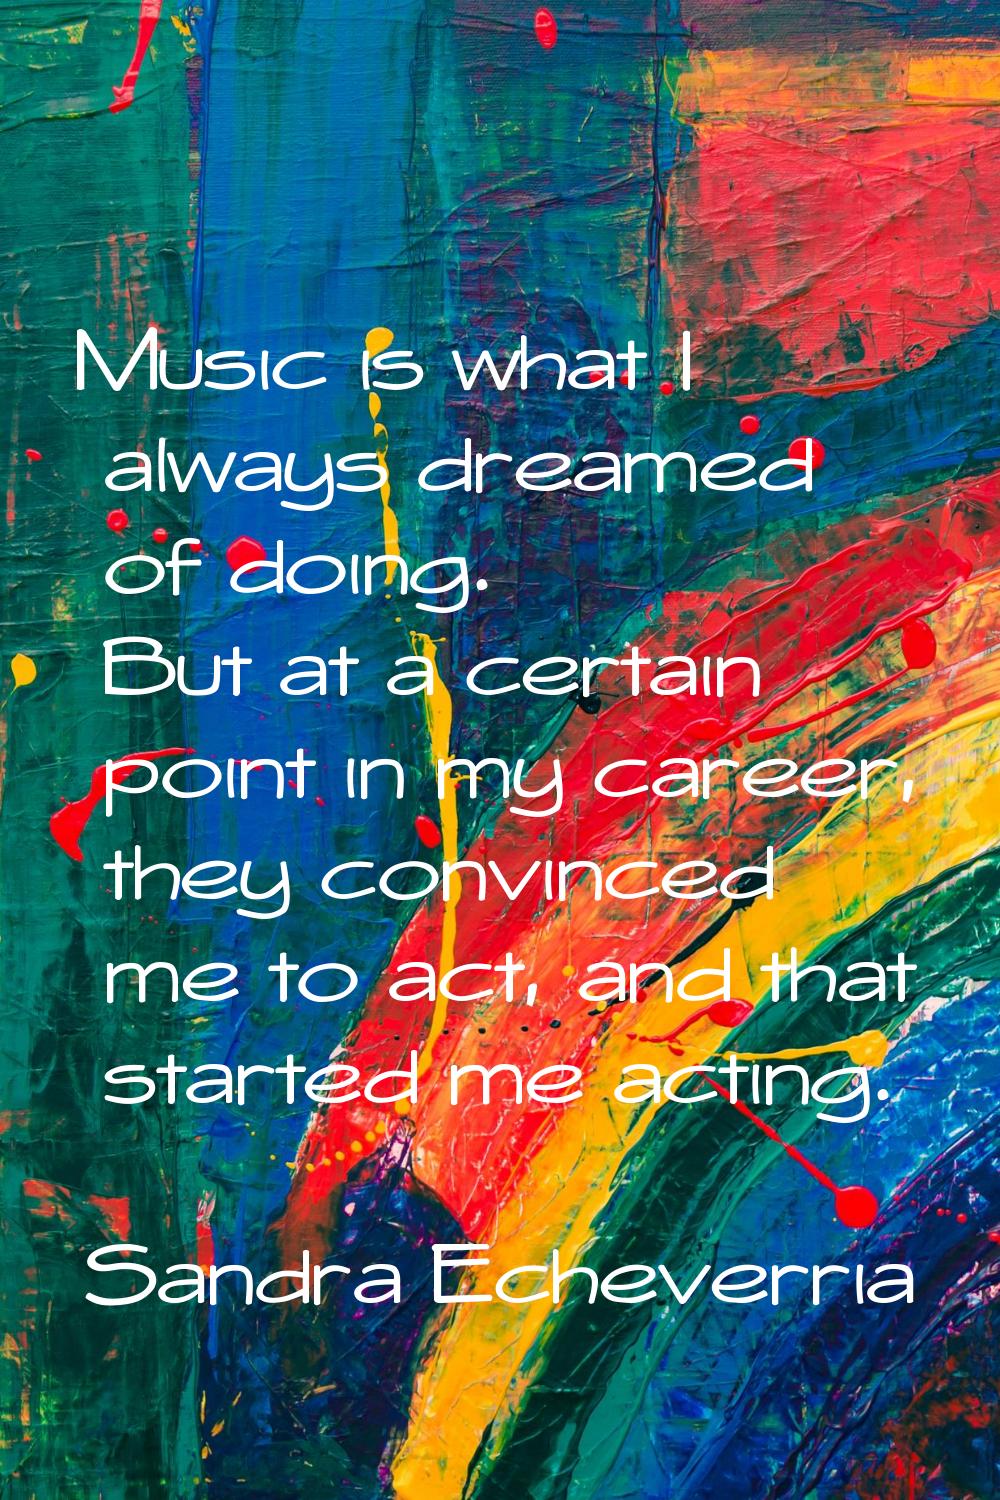 Music is what I always dreamed of doing. But at a certain point in my career, they convinced me to 